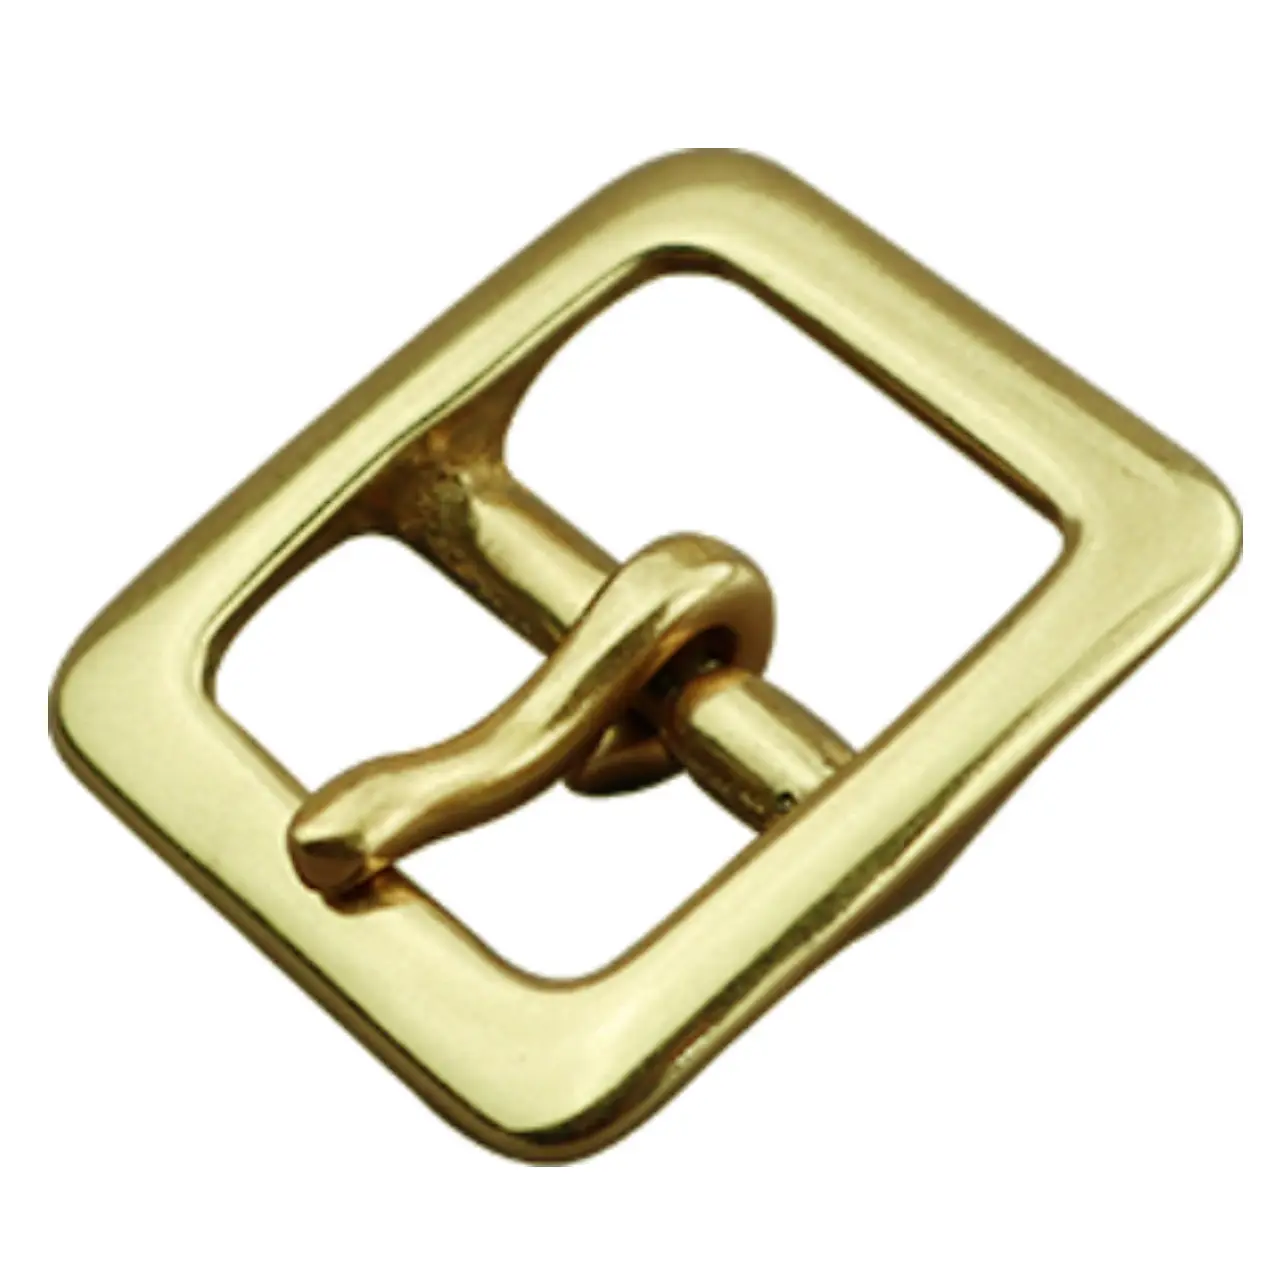 Hot selling 25MM SOLID BRASS  belt buckle Single pin Center bar buckle For Men